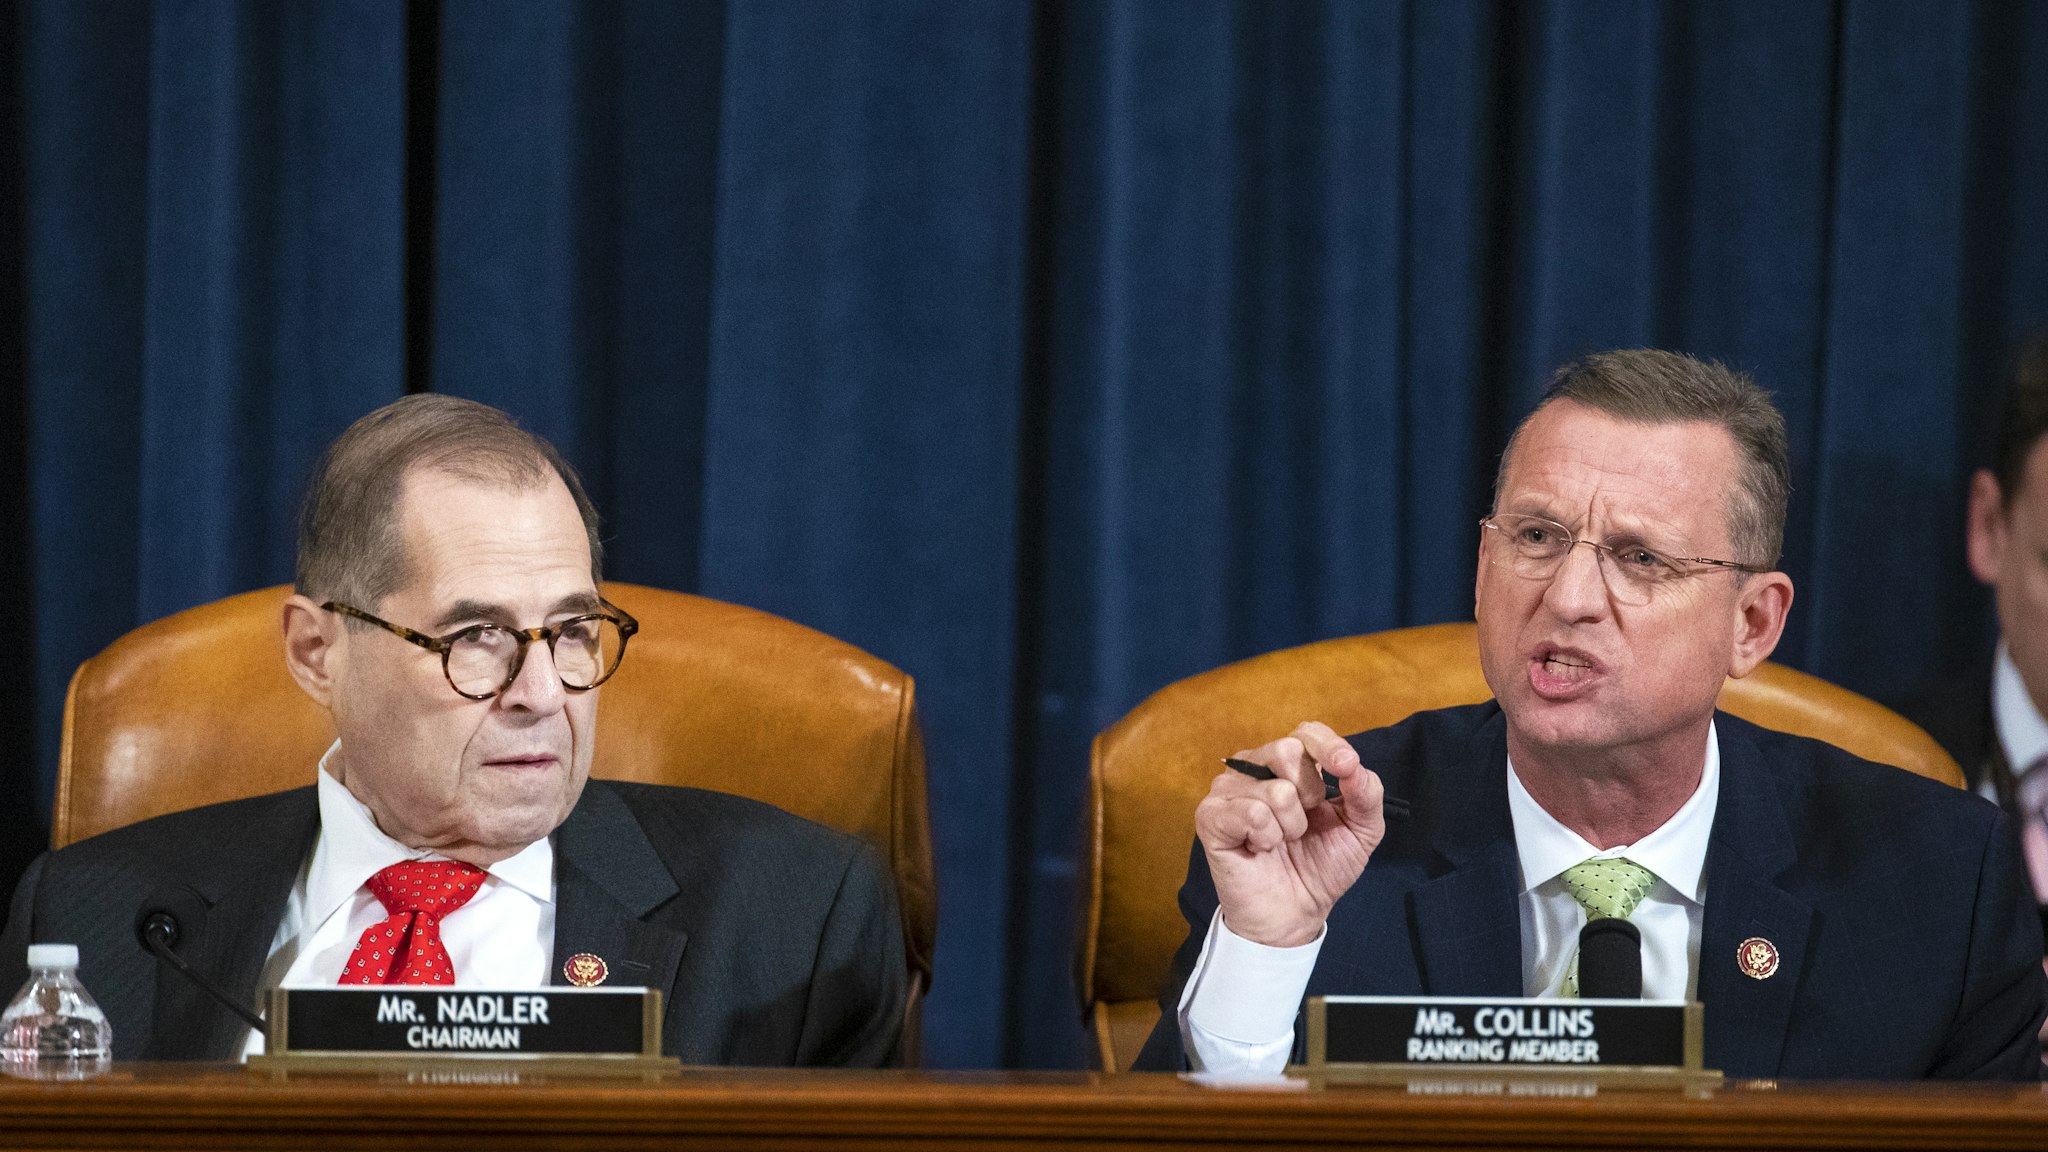 Representative Doug Collins, a Republican from Georgia and ranking member of the House Judiciary Committee, right, speaks while chairman Representative Jerry Nadler, a Democrat from New York, listens during a House Judiciary Committee hearing in Washington, D.C., U.S., on Thursday, Dec. 12, 2019. The Judiciary Committee is set to finish debating articles of impeachment against President Donald Trump today with a likely party-line vote to send the resolution to the floor of the House.